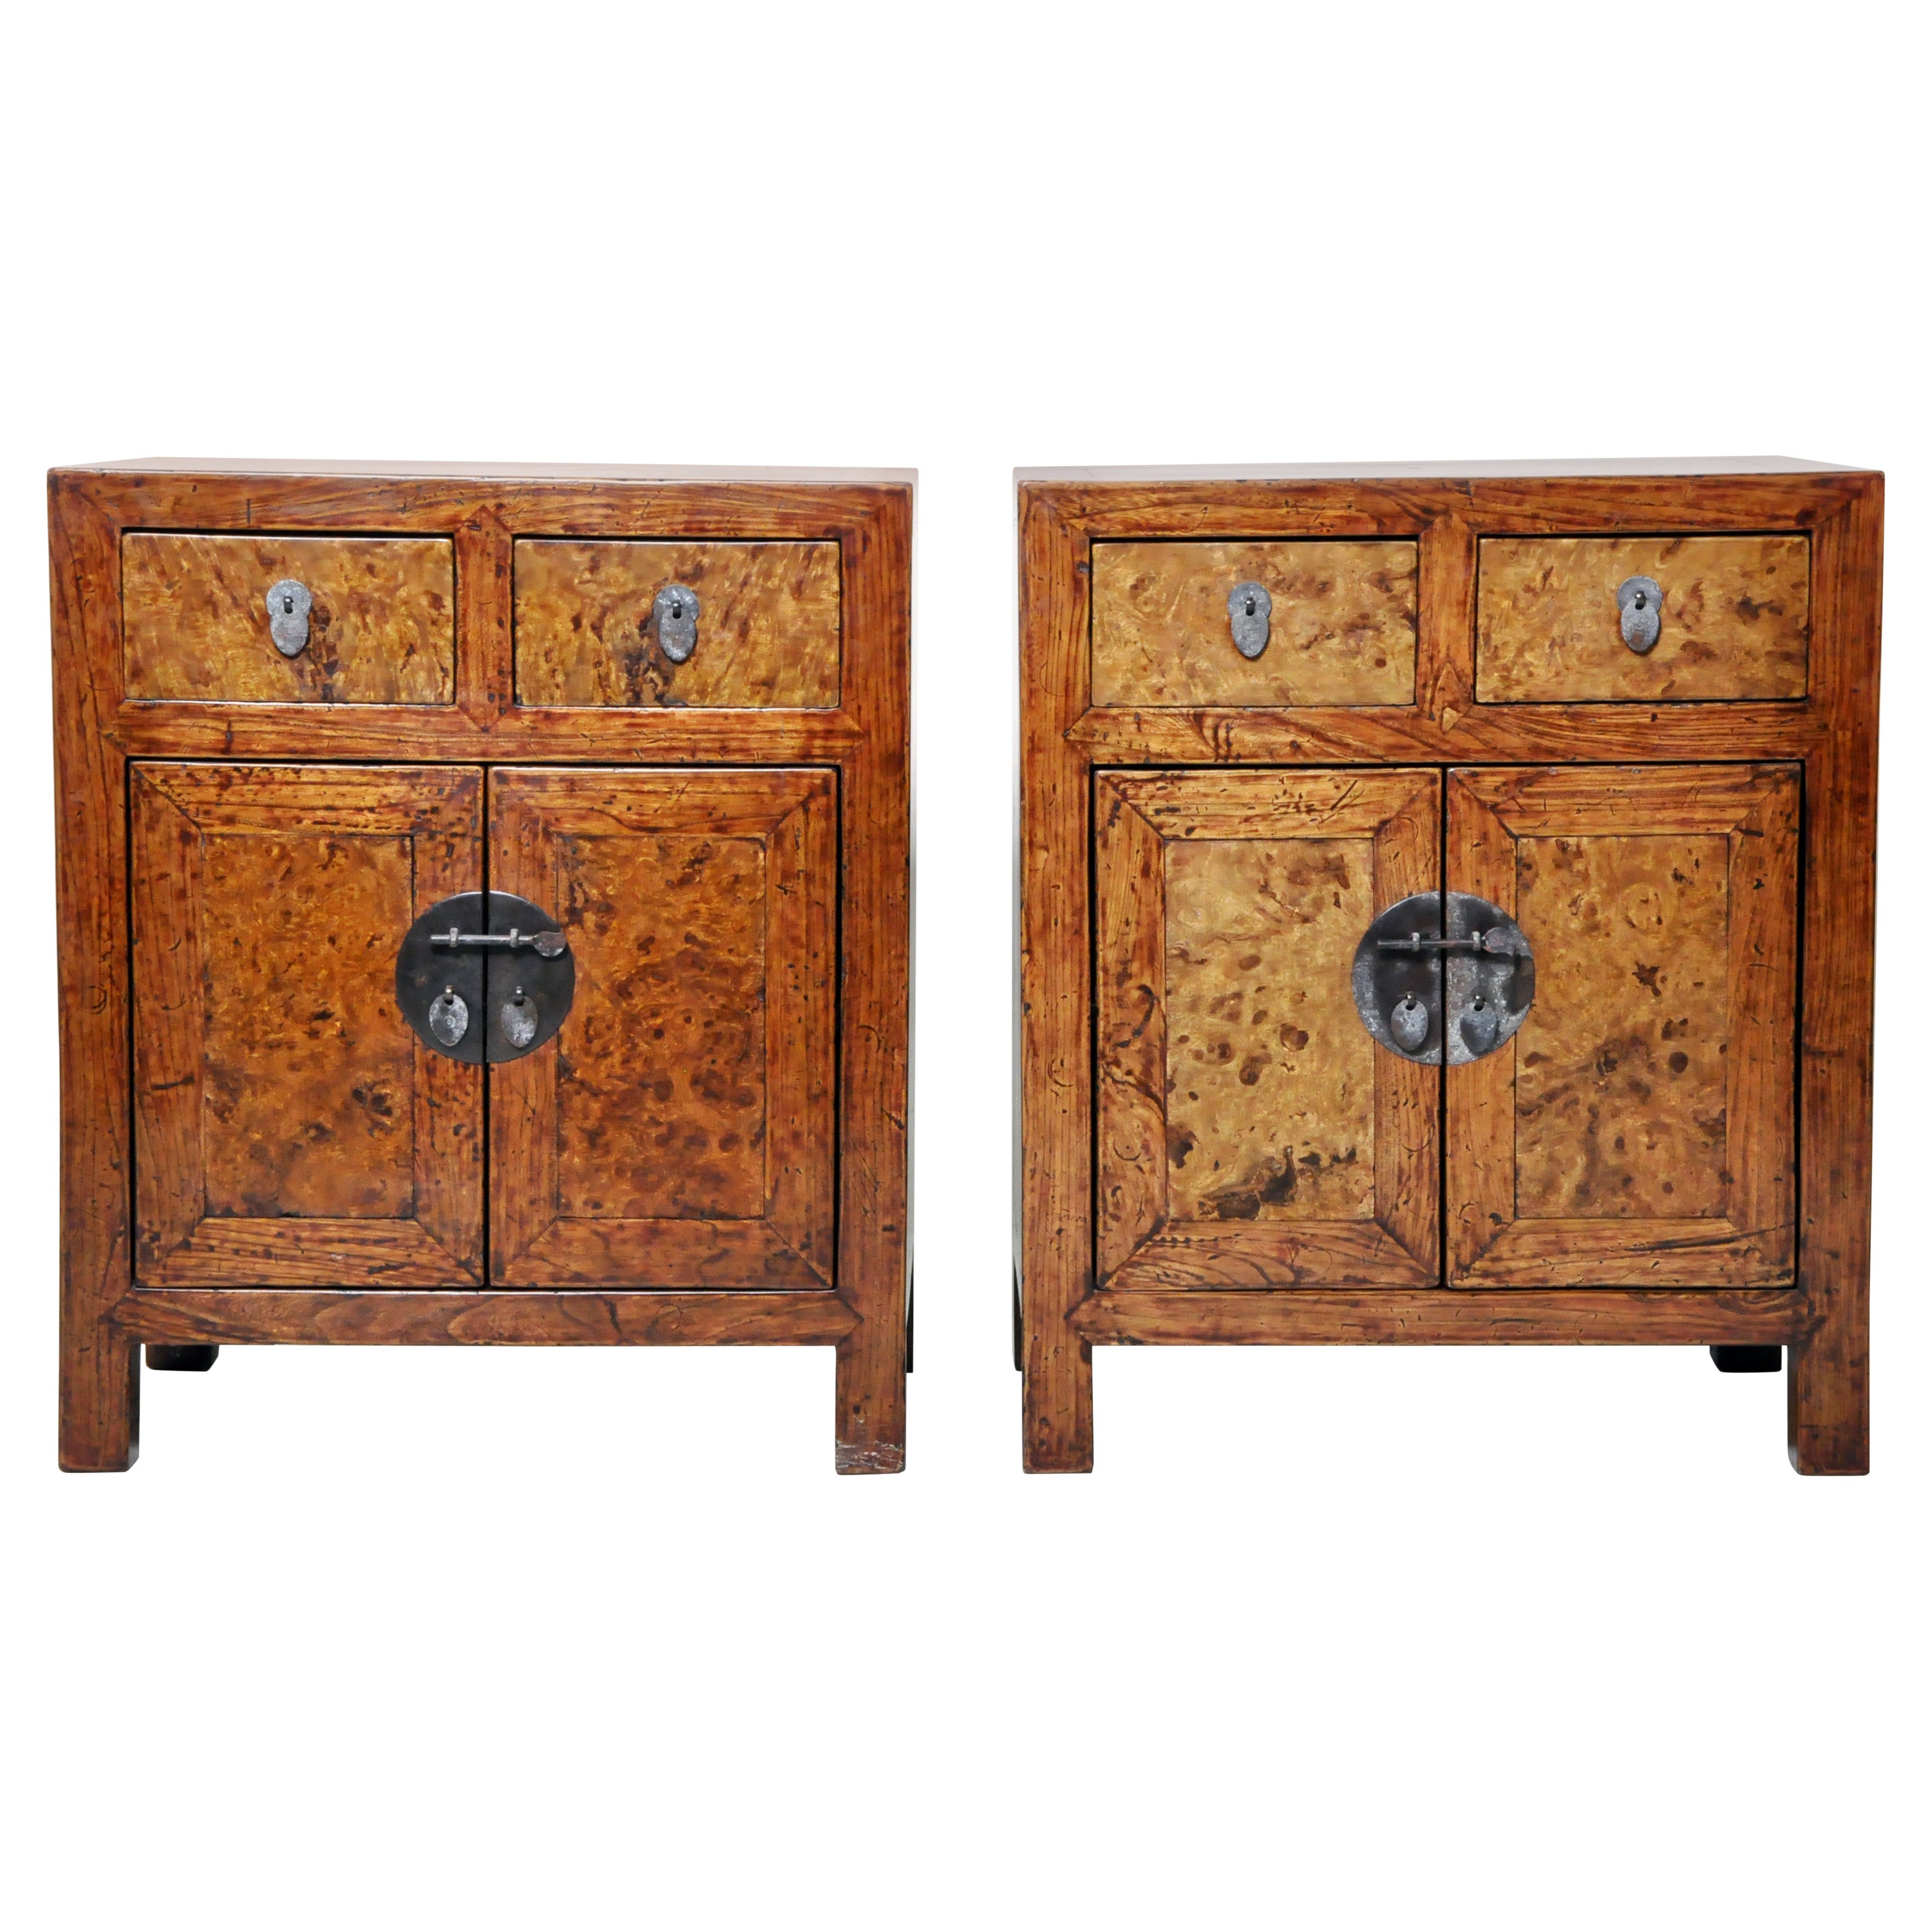 Pair of Burlwood Bedside Chests